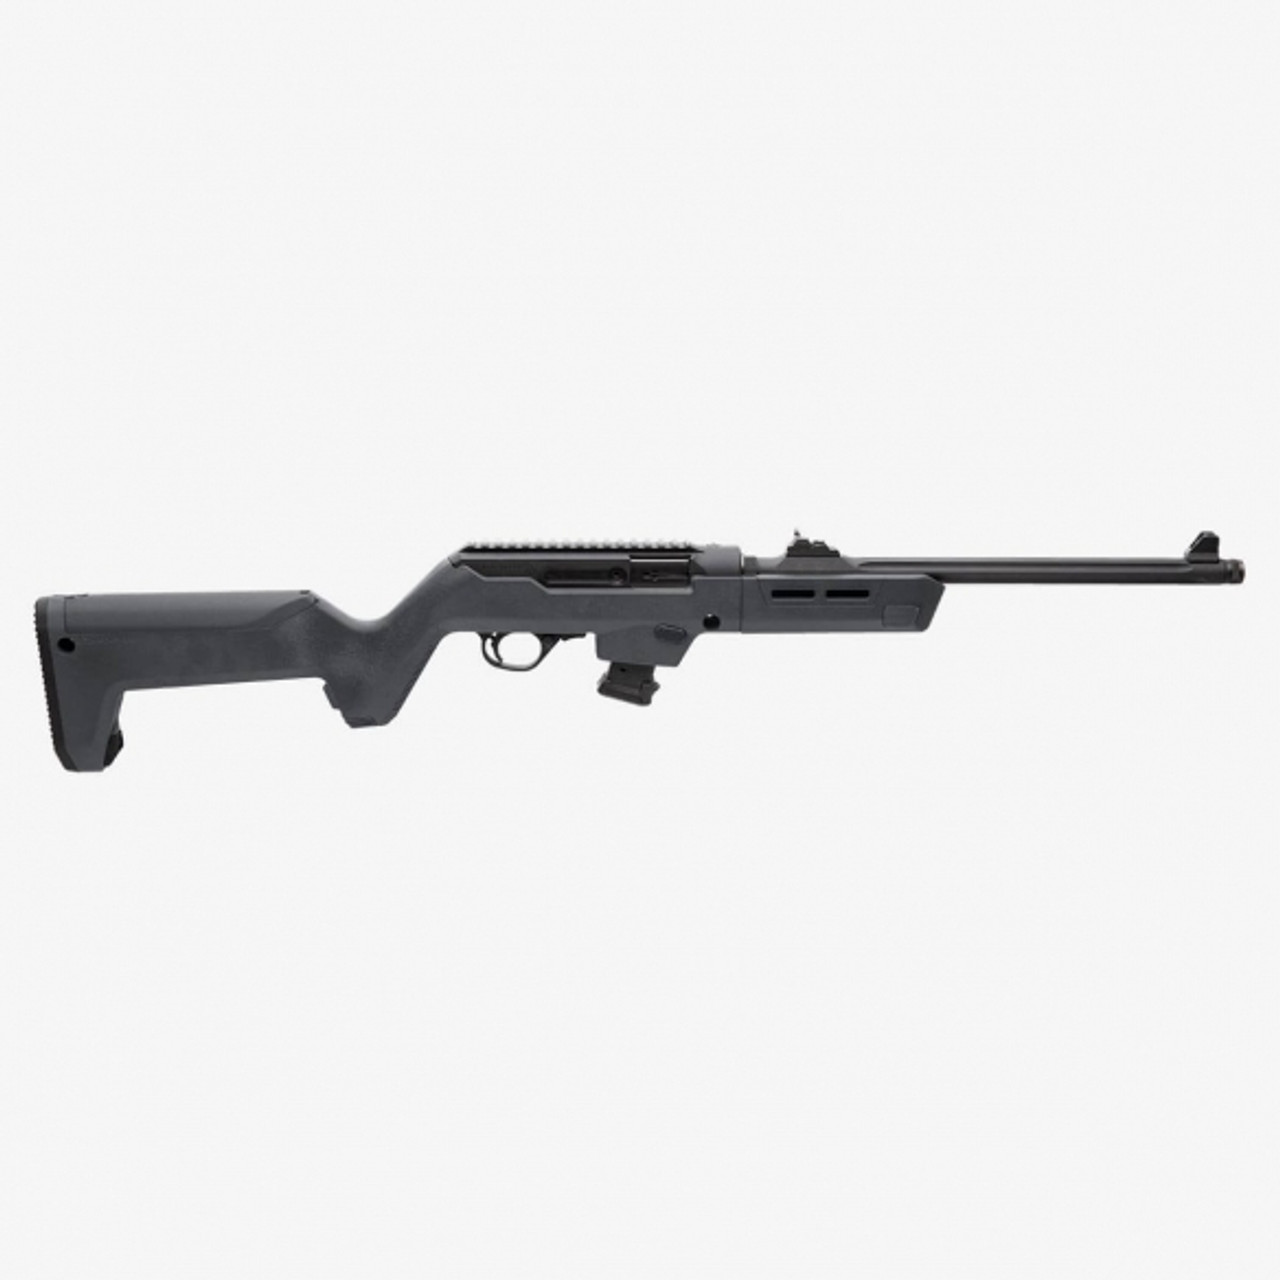 Magpul Backpacker Stock For Ruger PC Carbine, Gray